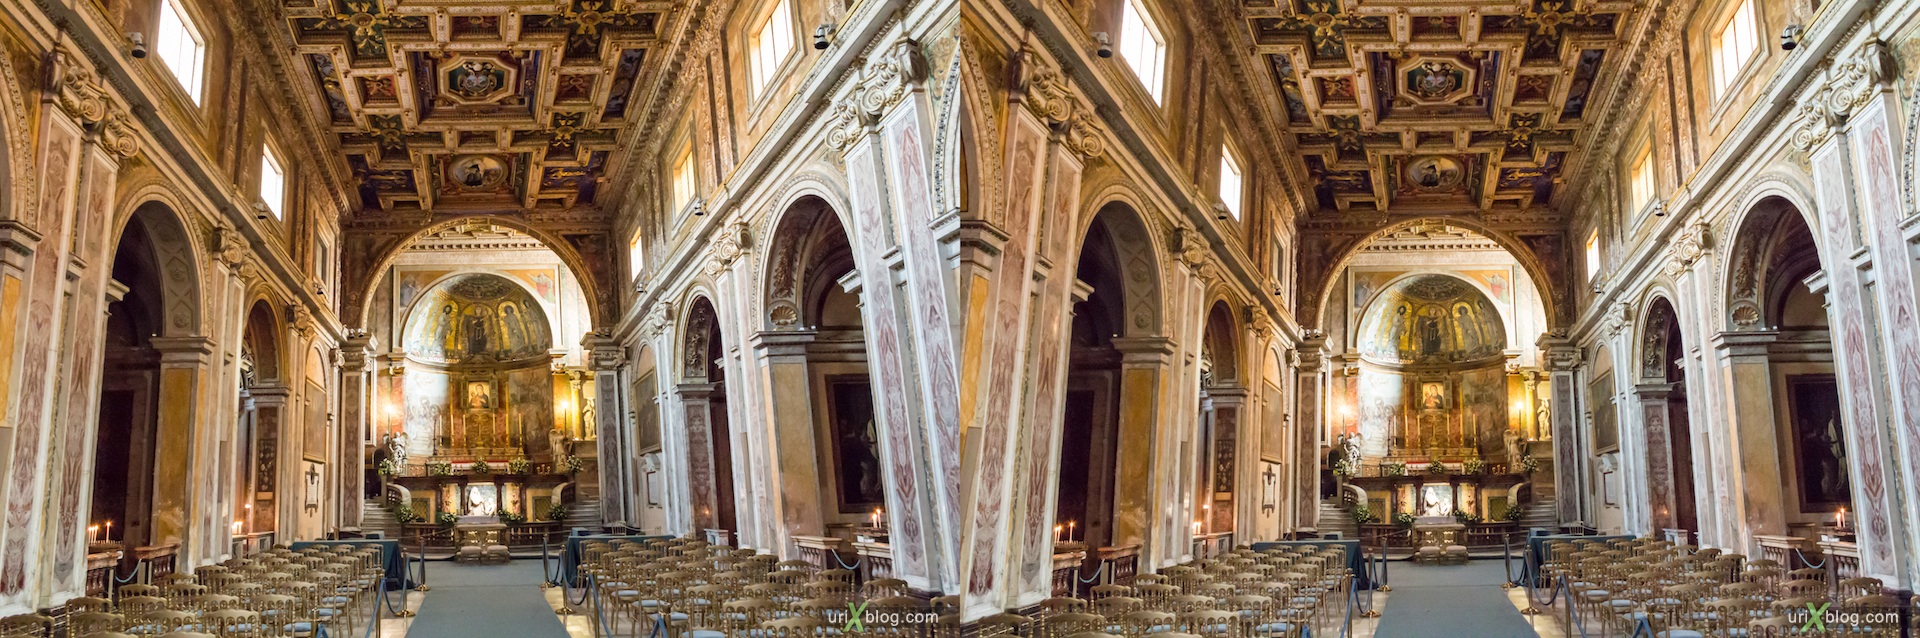 2012, church of Santa Francesca Romana, Rome, Italy, cathedral, monastery, Christianity, Catholicism, 3D, stereo pair, cross-eyed, crossview, cross view stereo pair